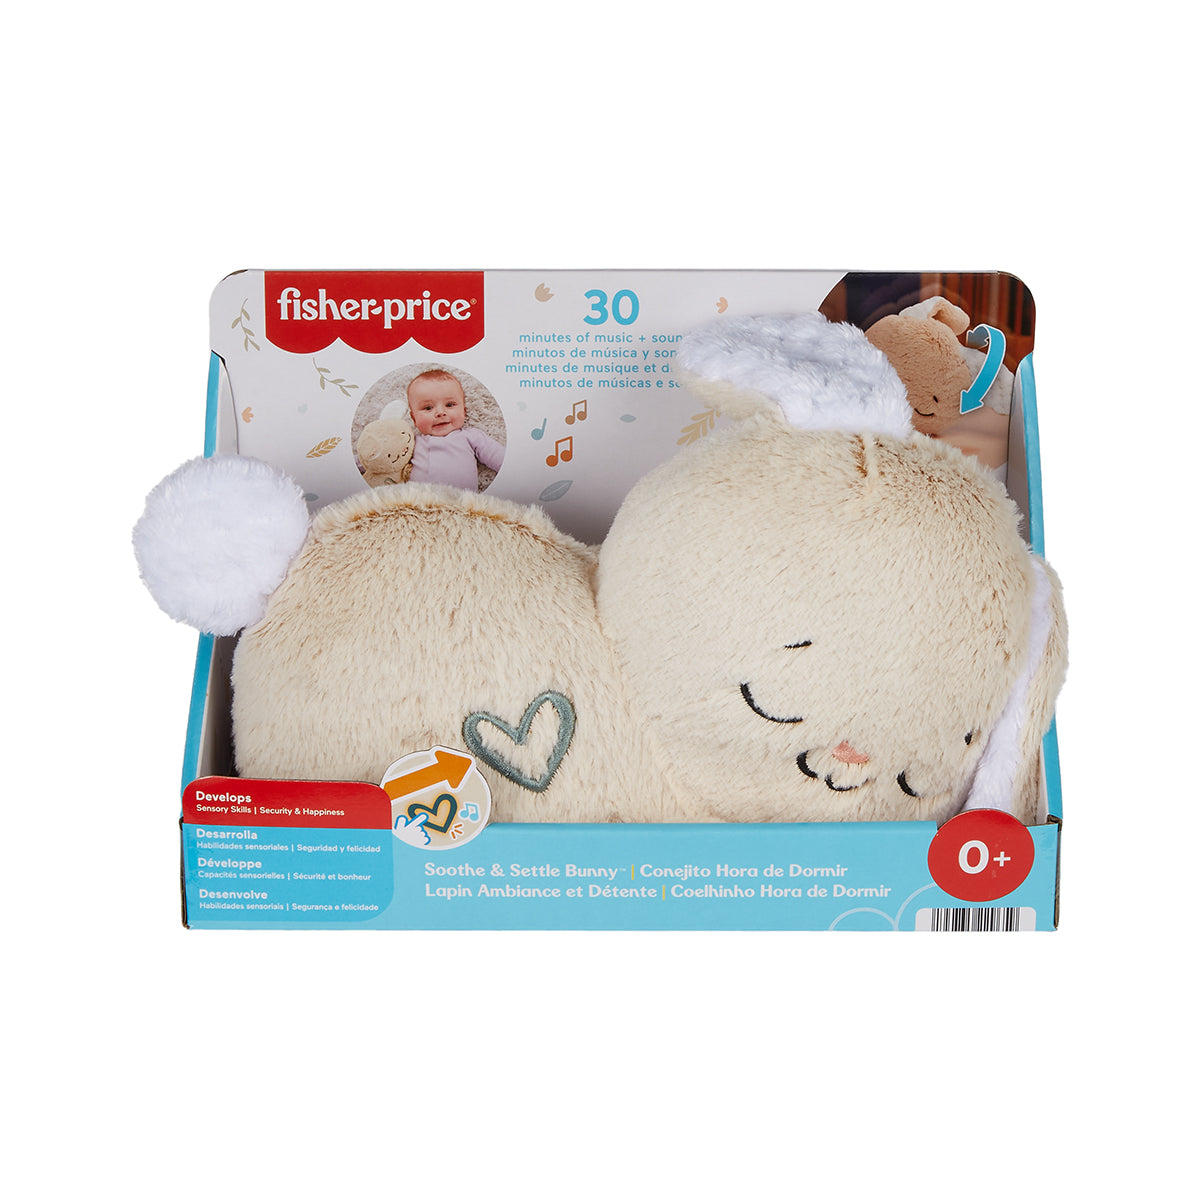 Fisher-Price Soothe & Settle Bunny